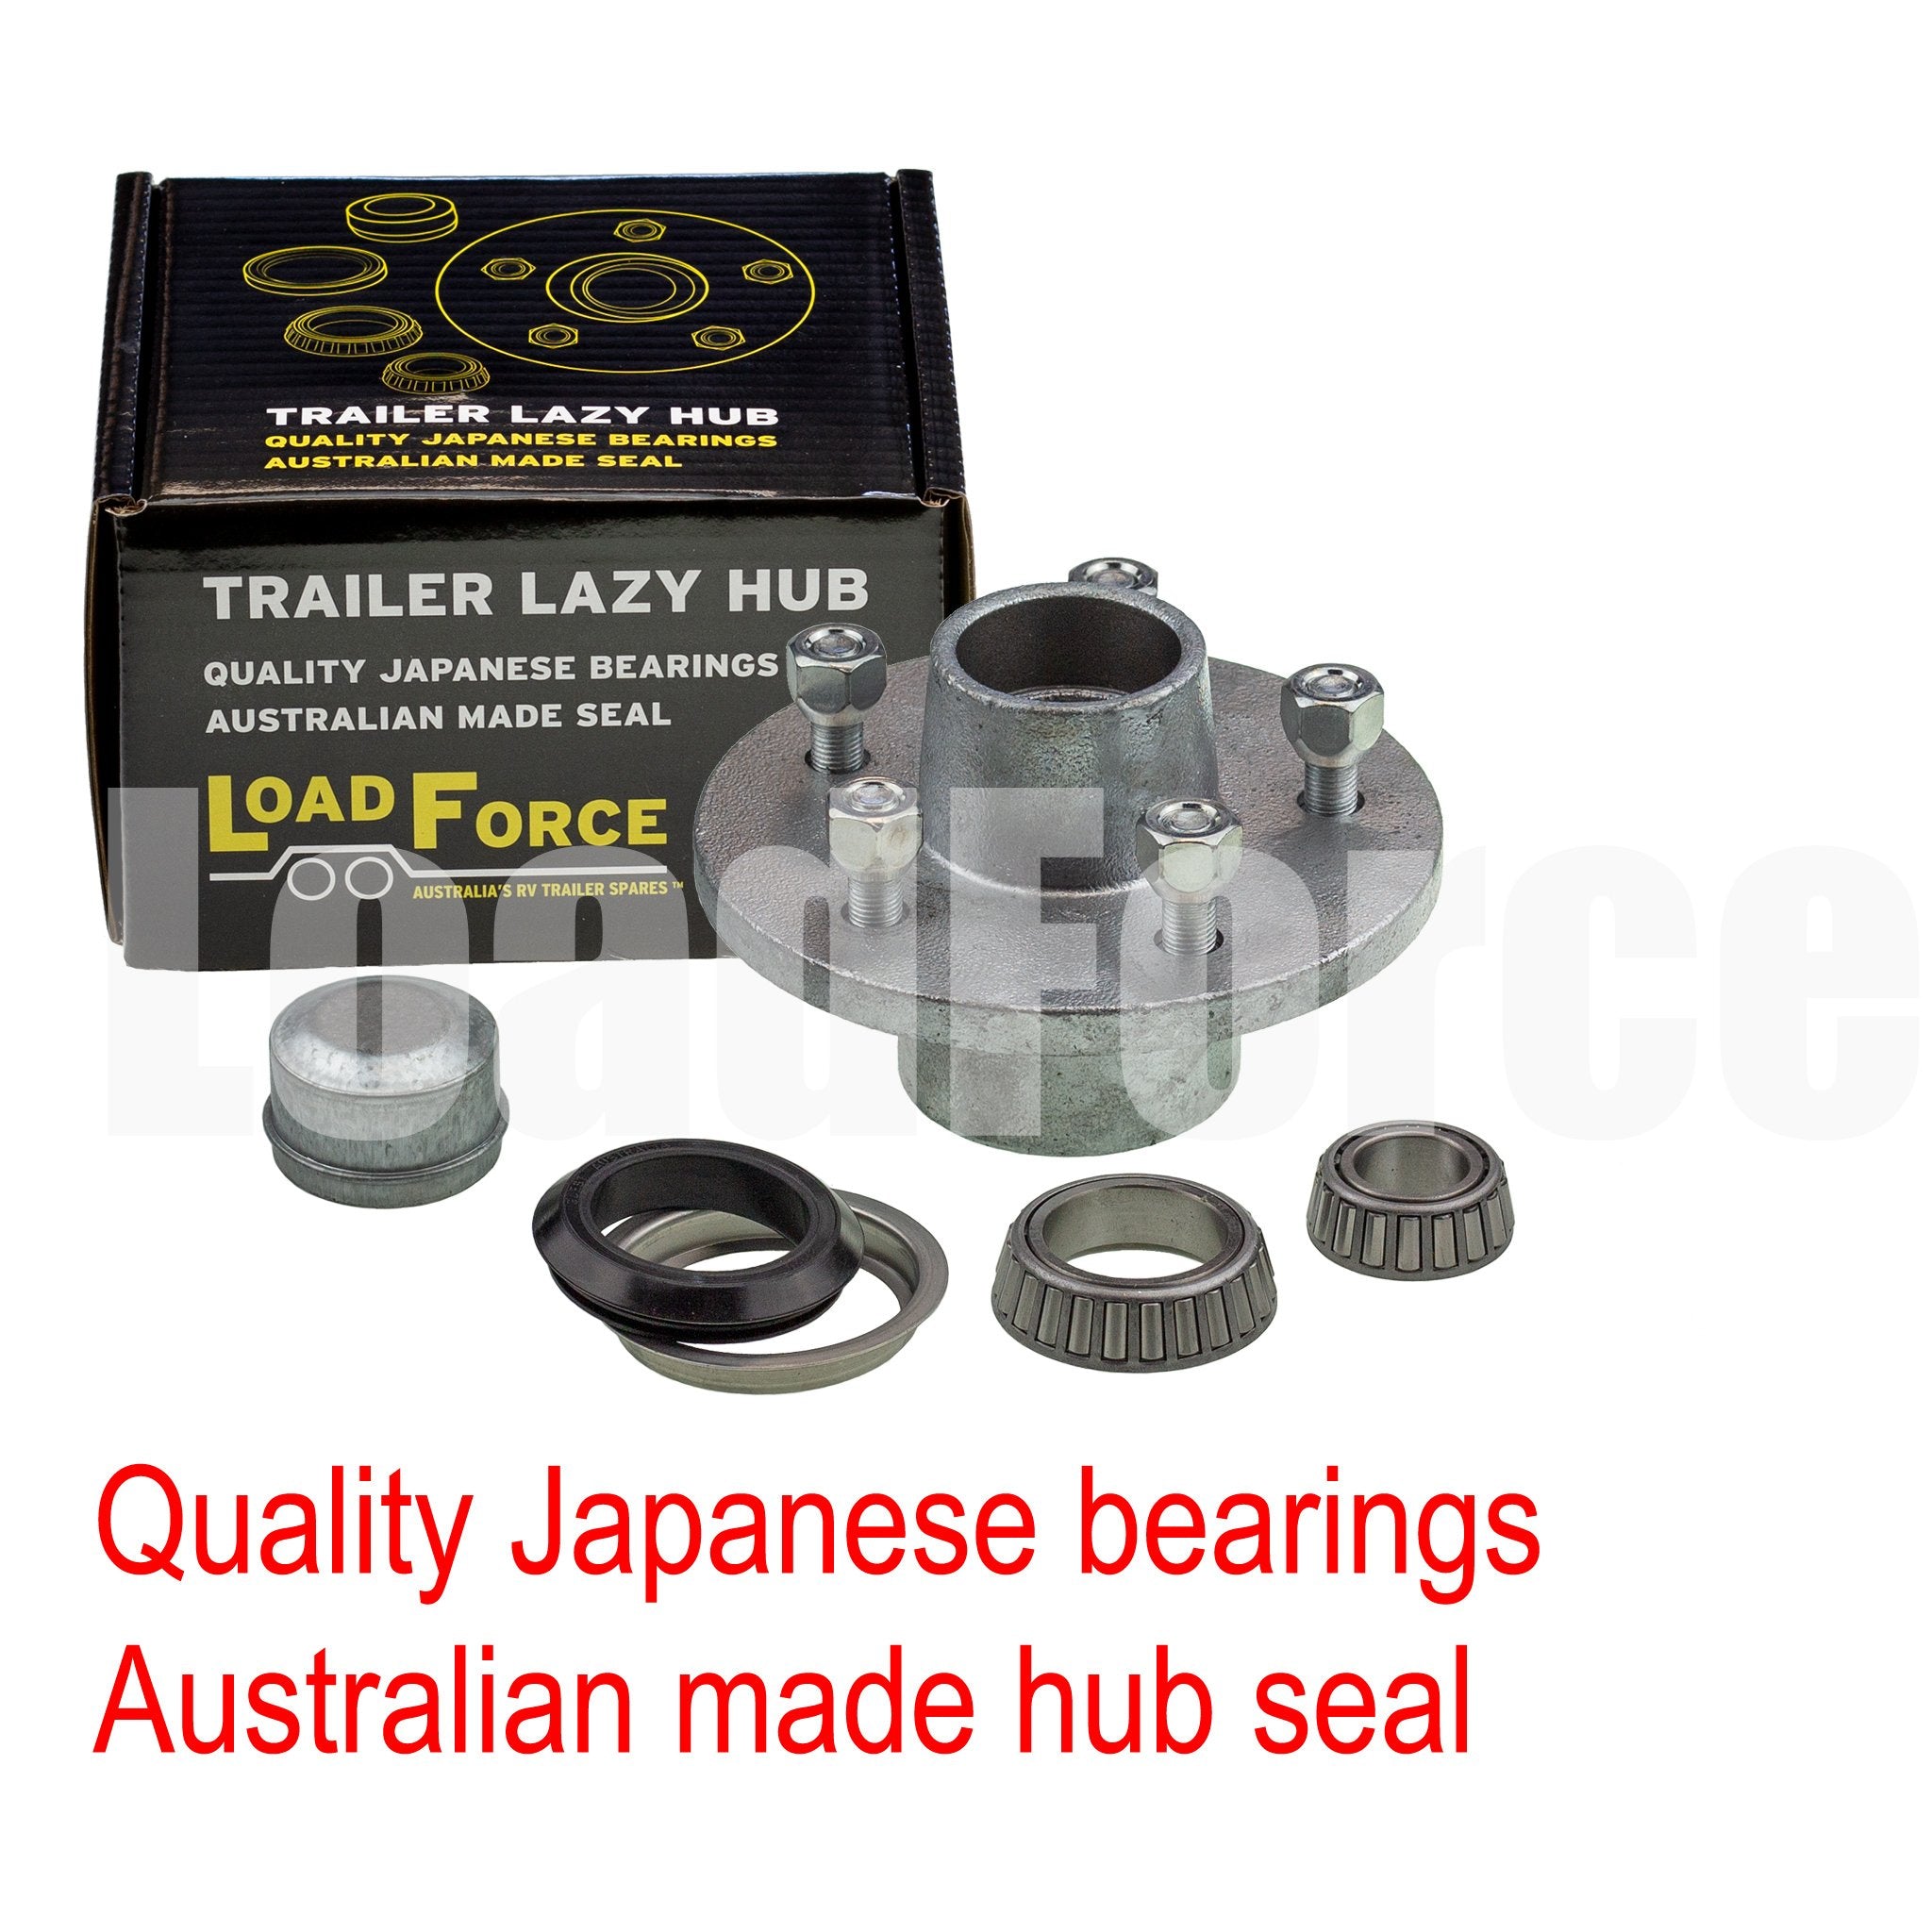 6 inch pcd ford 5 stud lm bearing lazy hub assembly galvanised